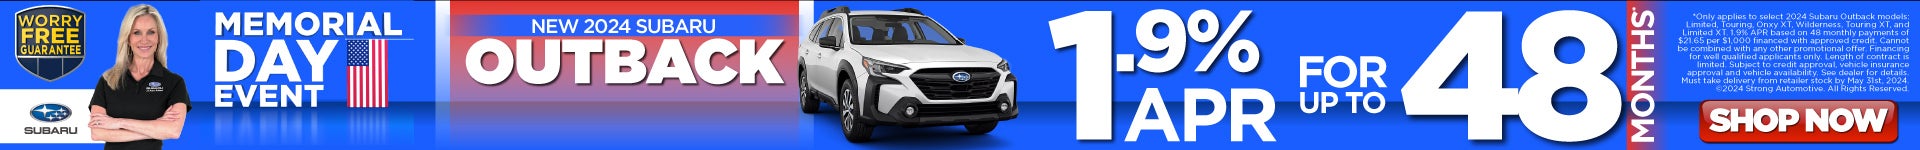 New 2024 Subaru Outback | 1.9% APR for up to 48 months*